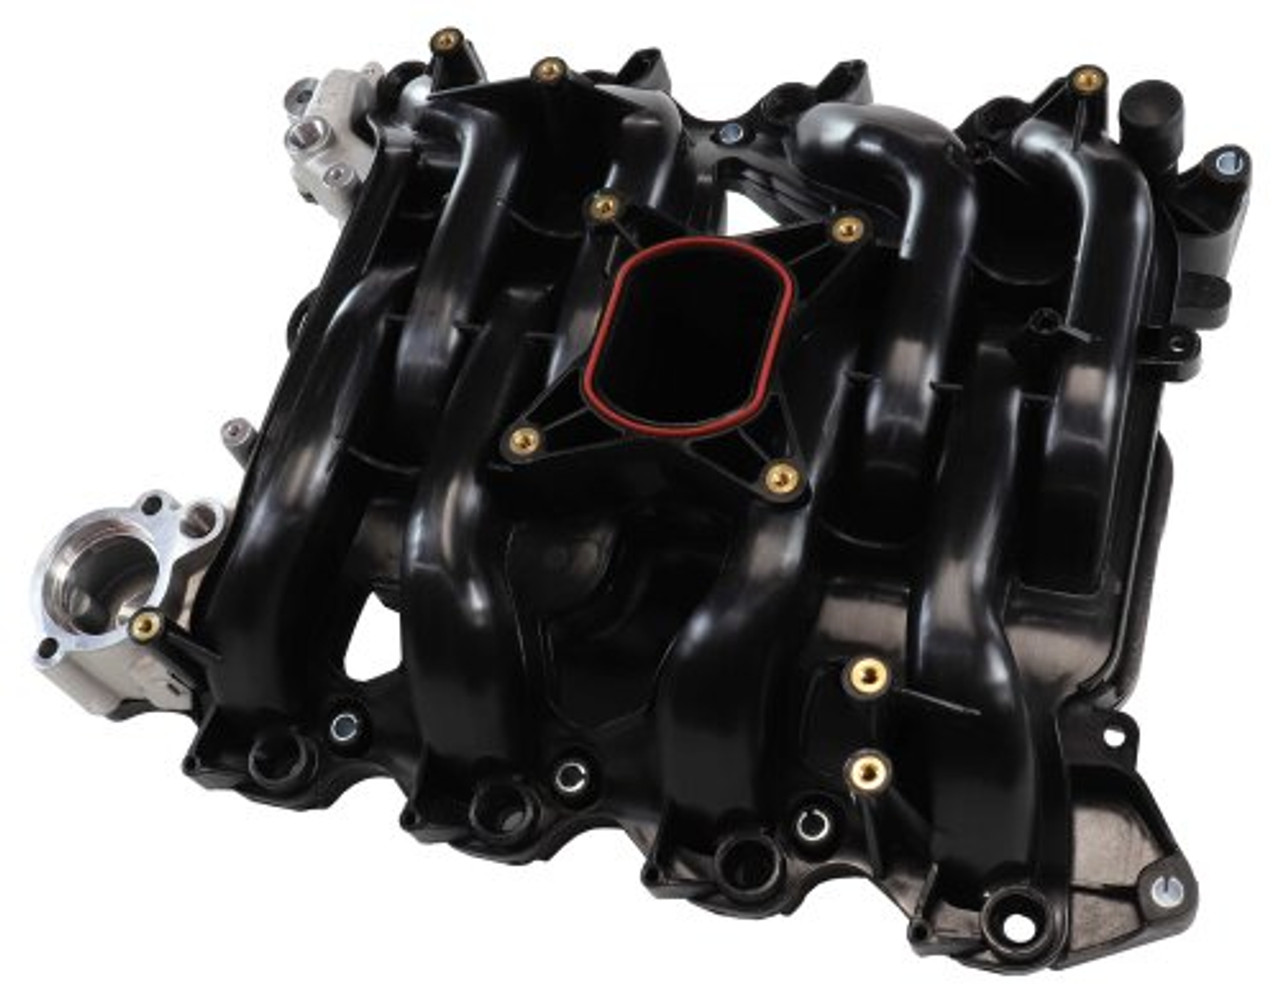 Intake Manifold - 2009 Ford Crown Victoria 4.6L Engine Parts # IMA1000ZE9